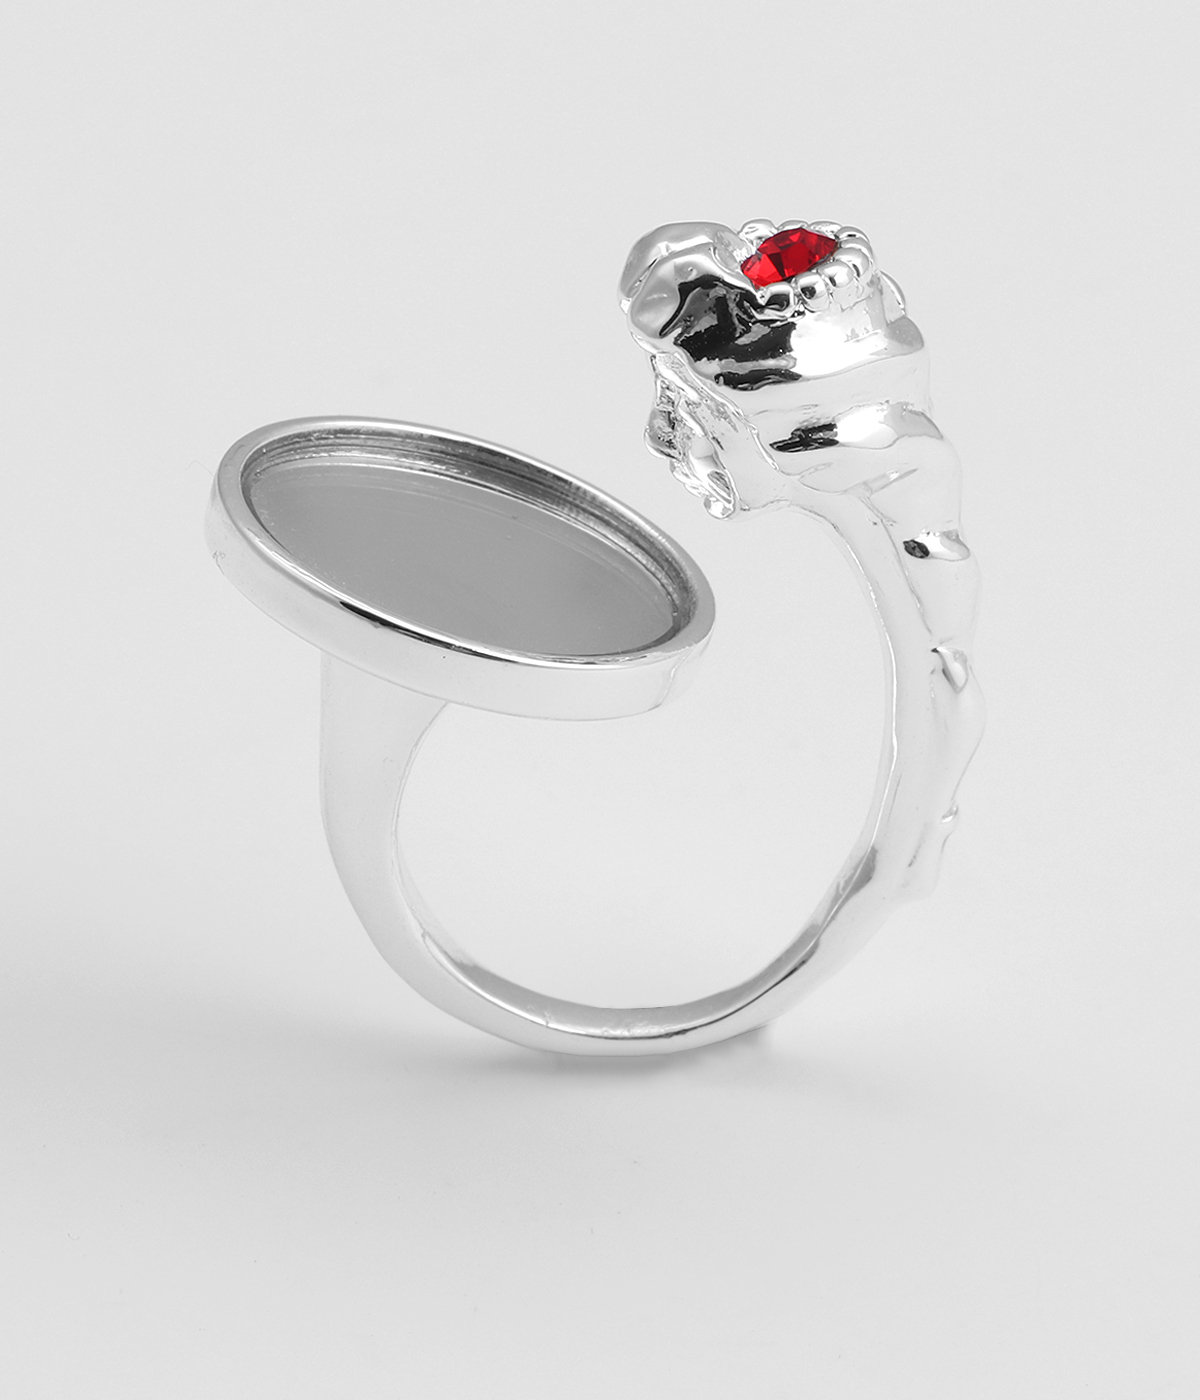 Narcissus -latest RING,Band Ring design 2021